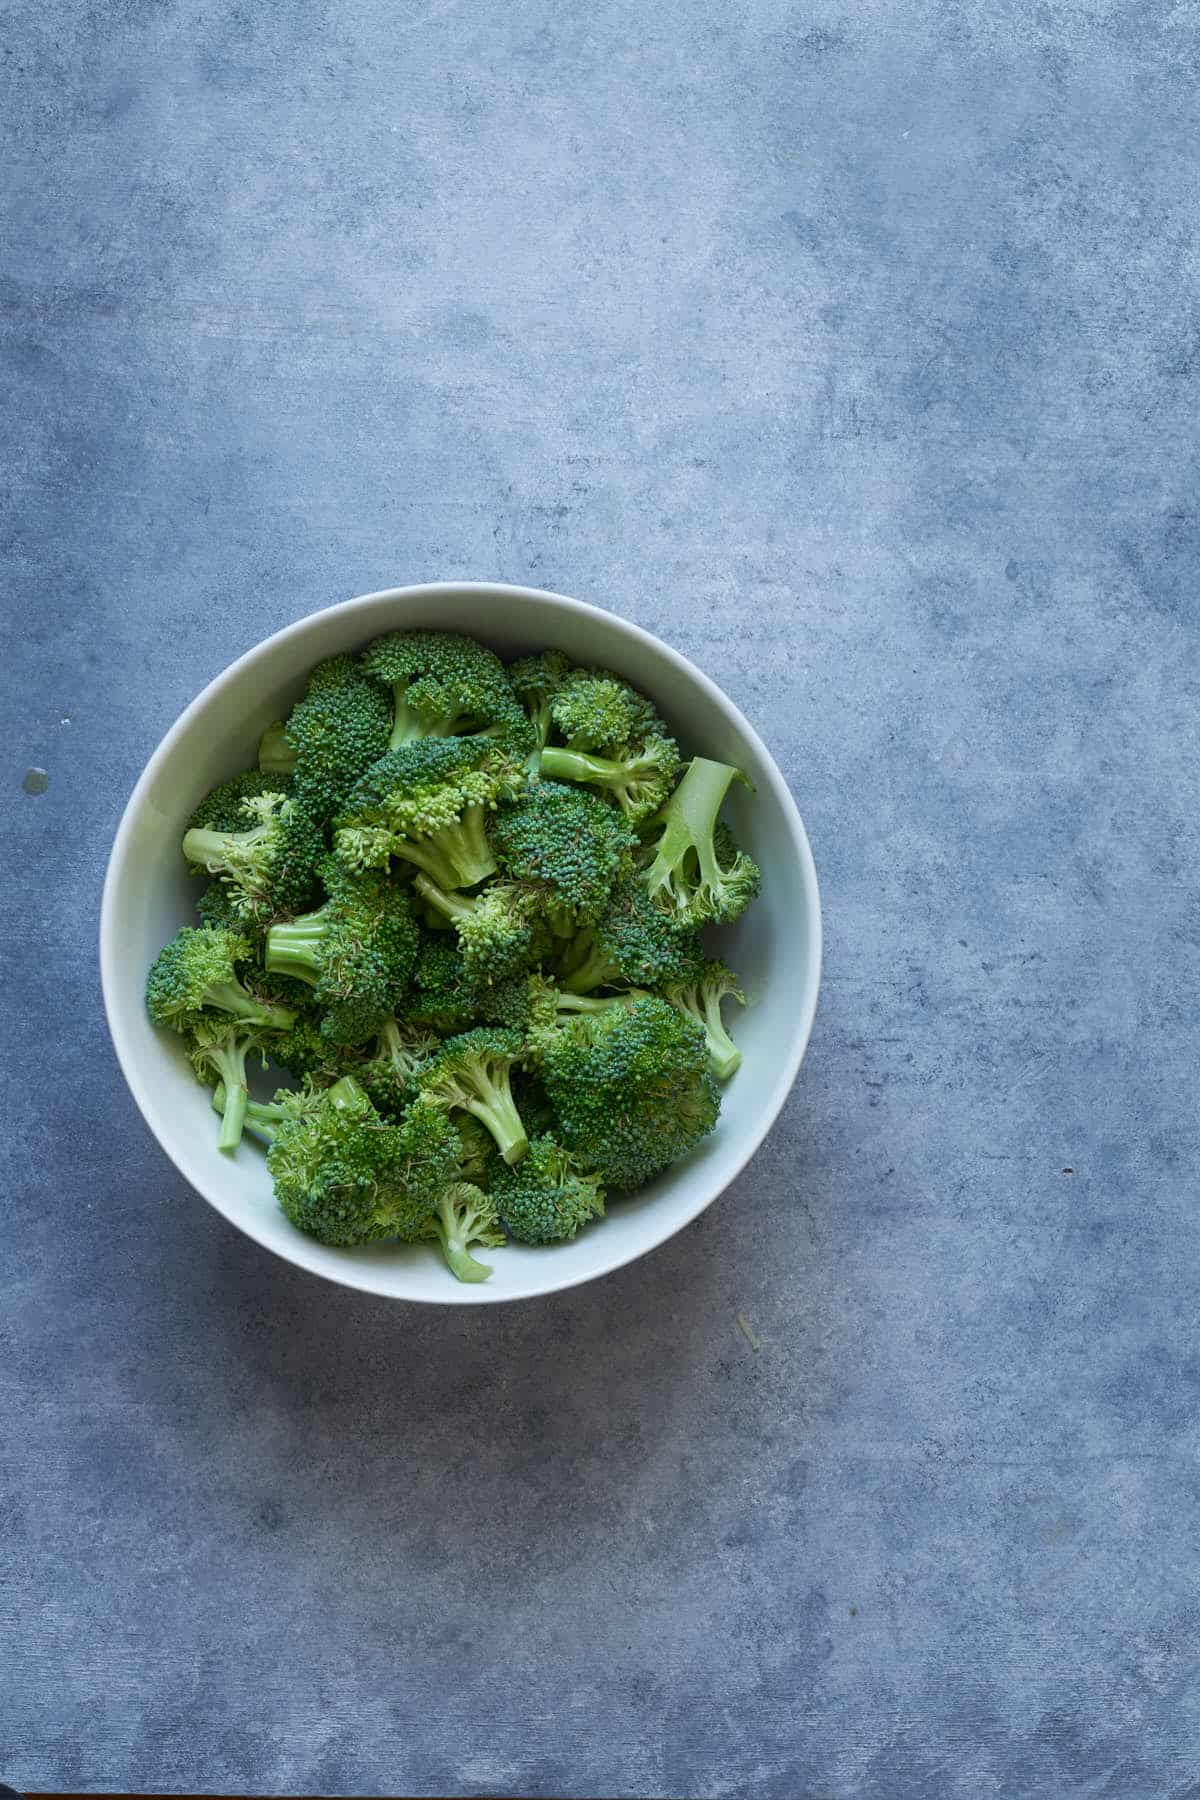 Broccoli, olive oil, and thyme in a bowl.